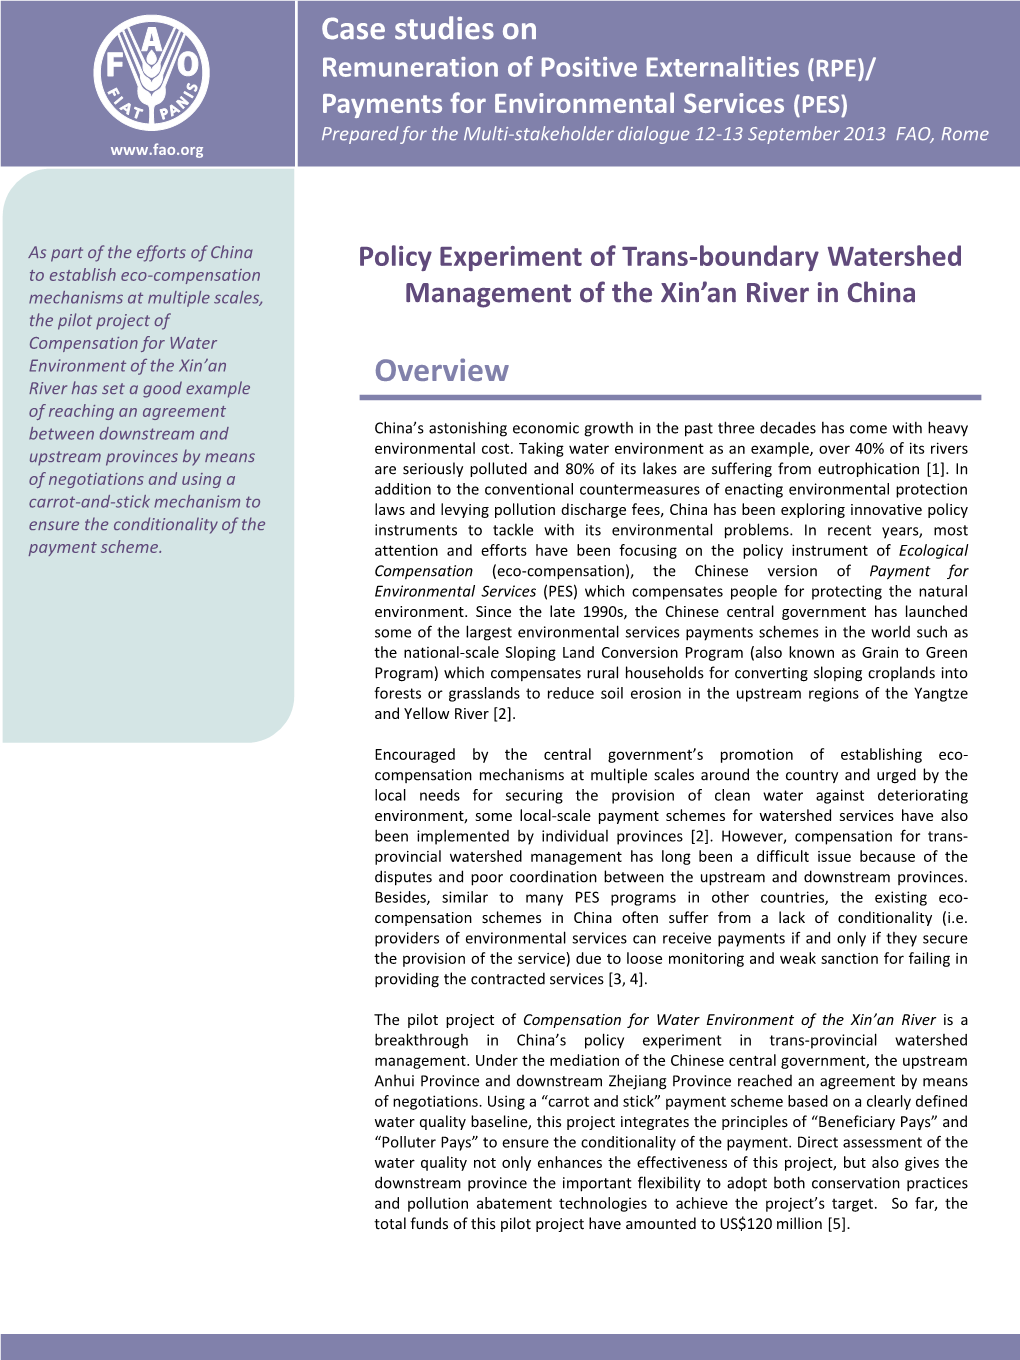 Policy Experiment of Transboundary Watershed Management of the Xin